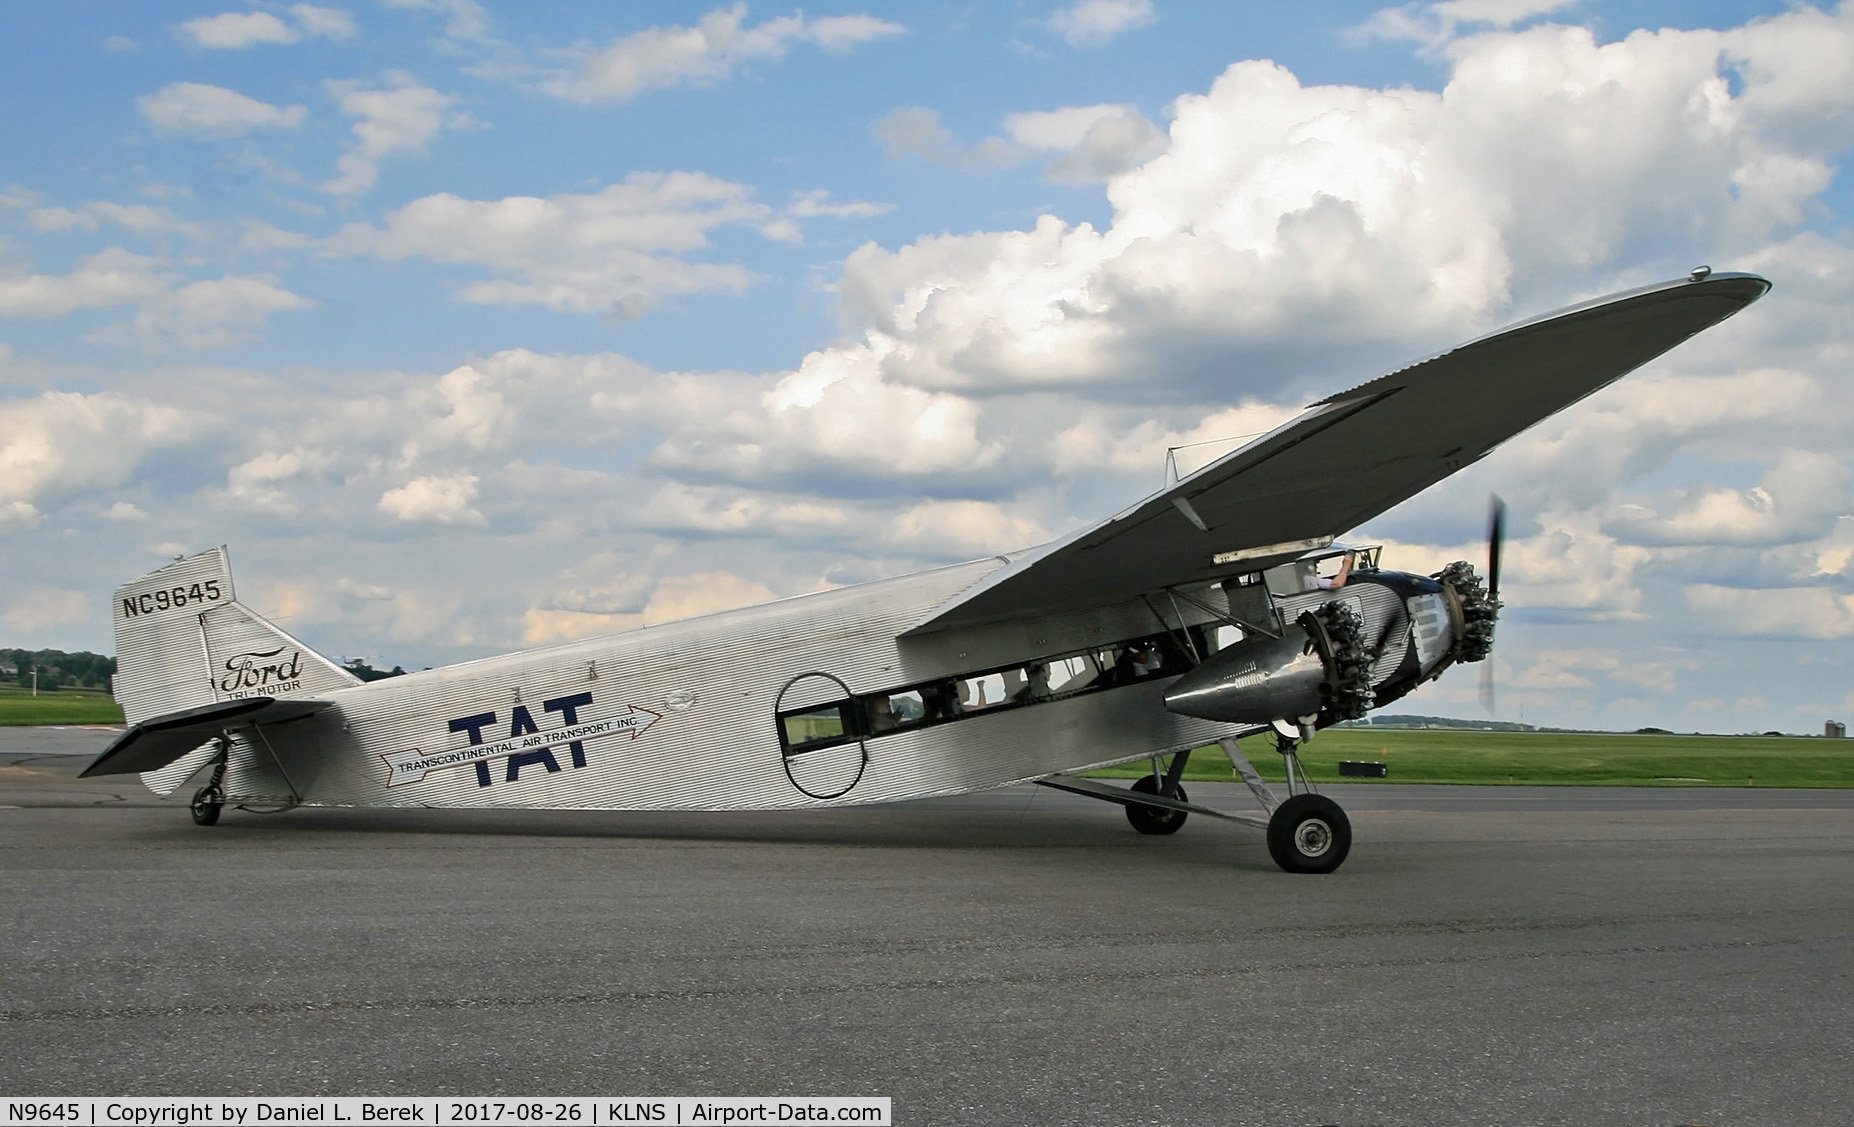 N9645, 1928 Ford 5-AT-B Tri-Motor C/N 8, This beautiful Tri Motor awaits its next load of lucky passengers (including me).